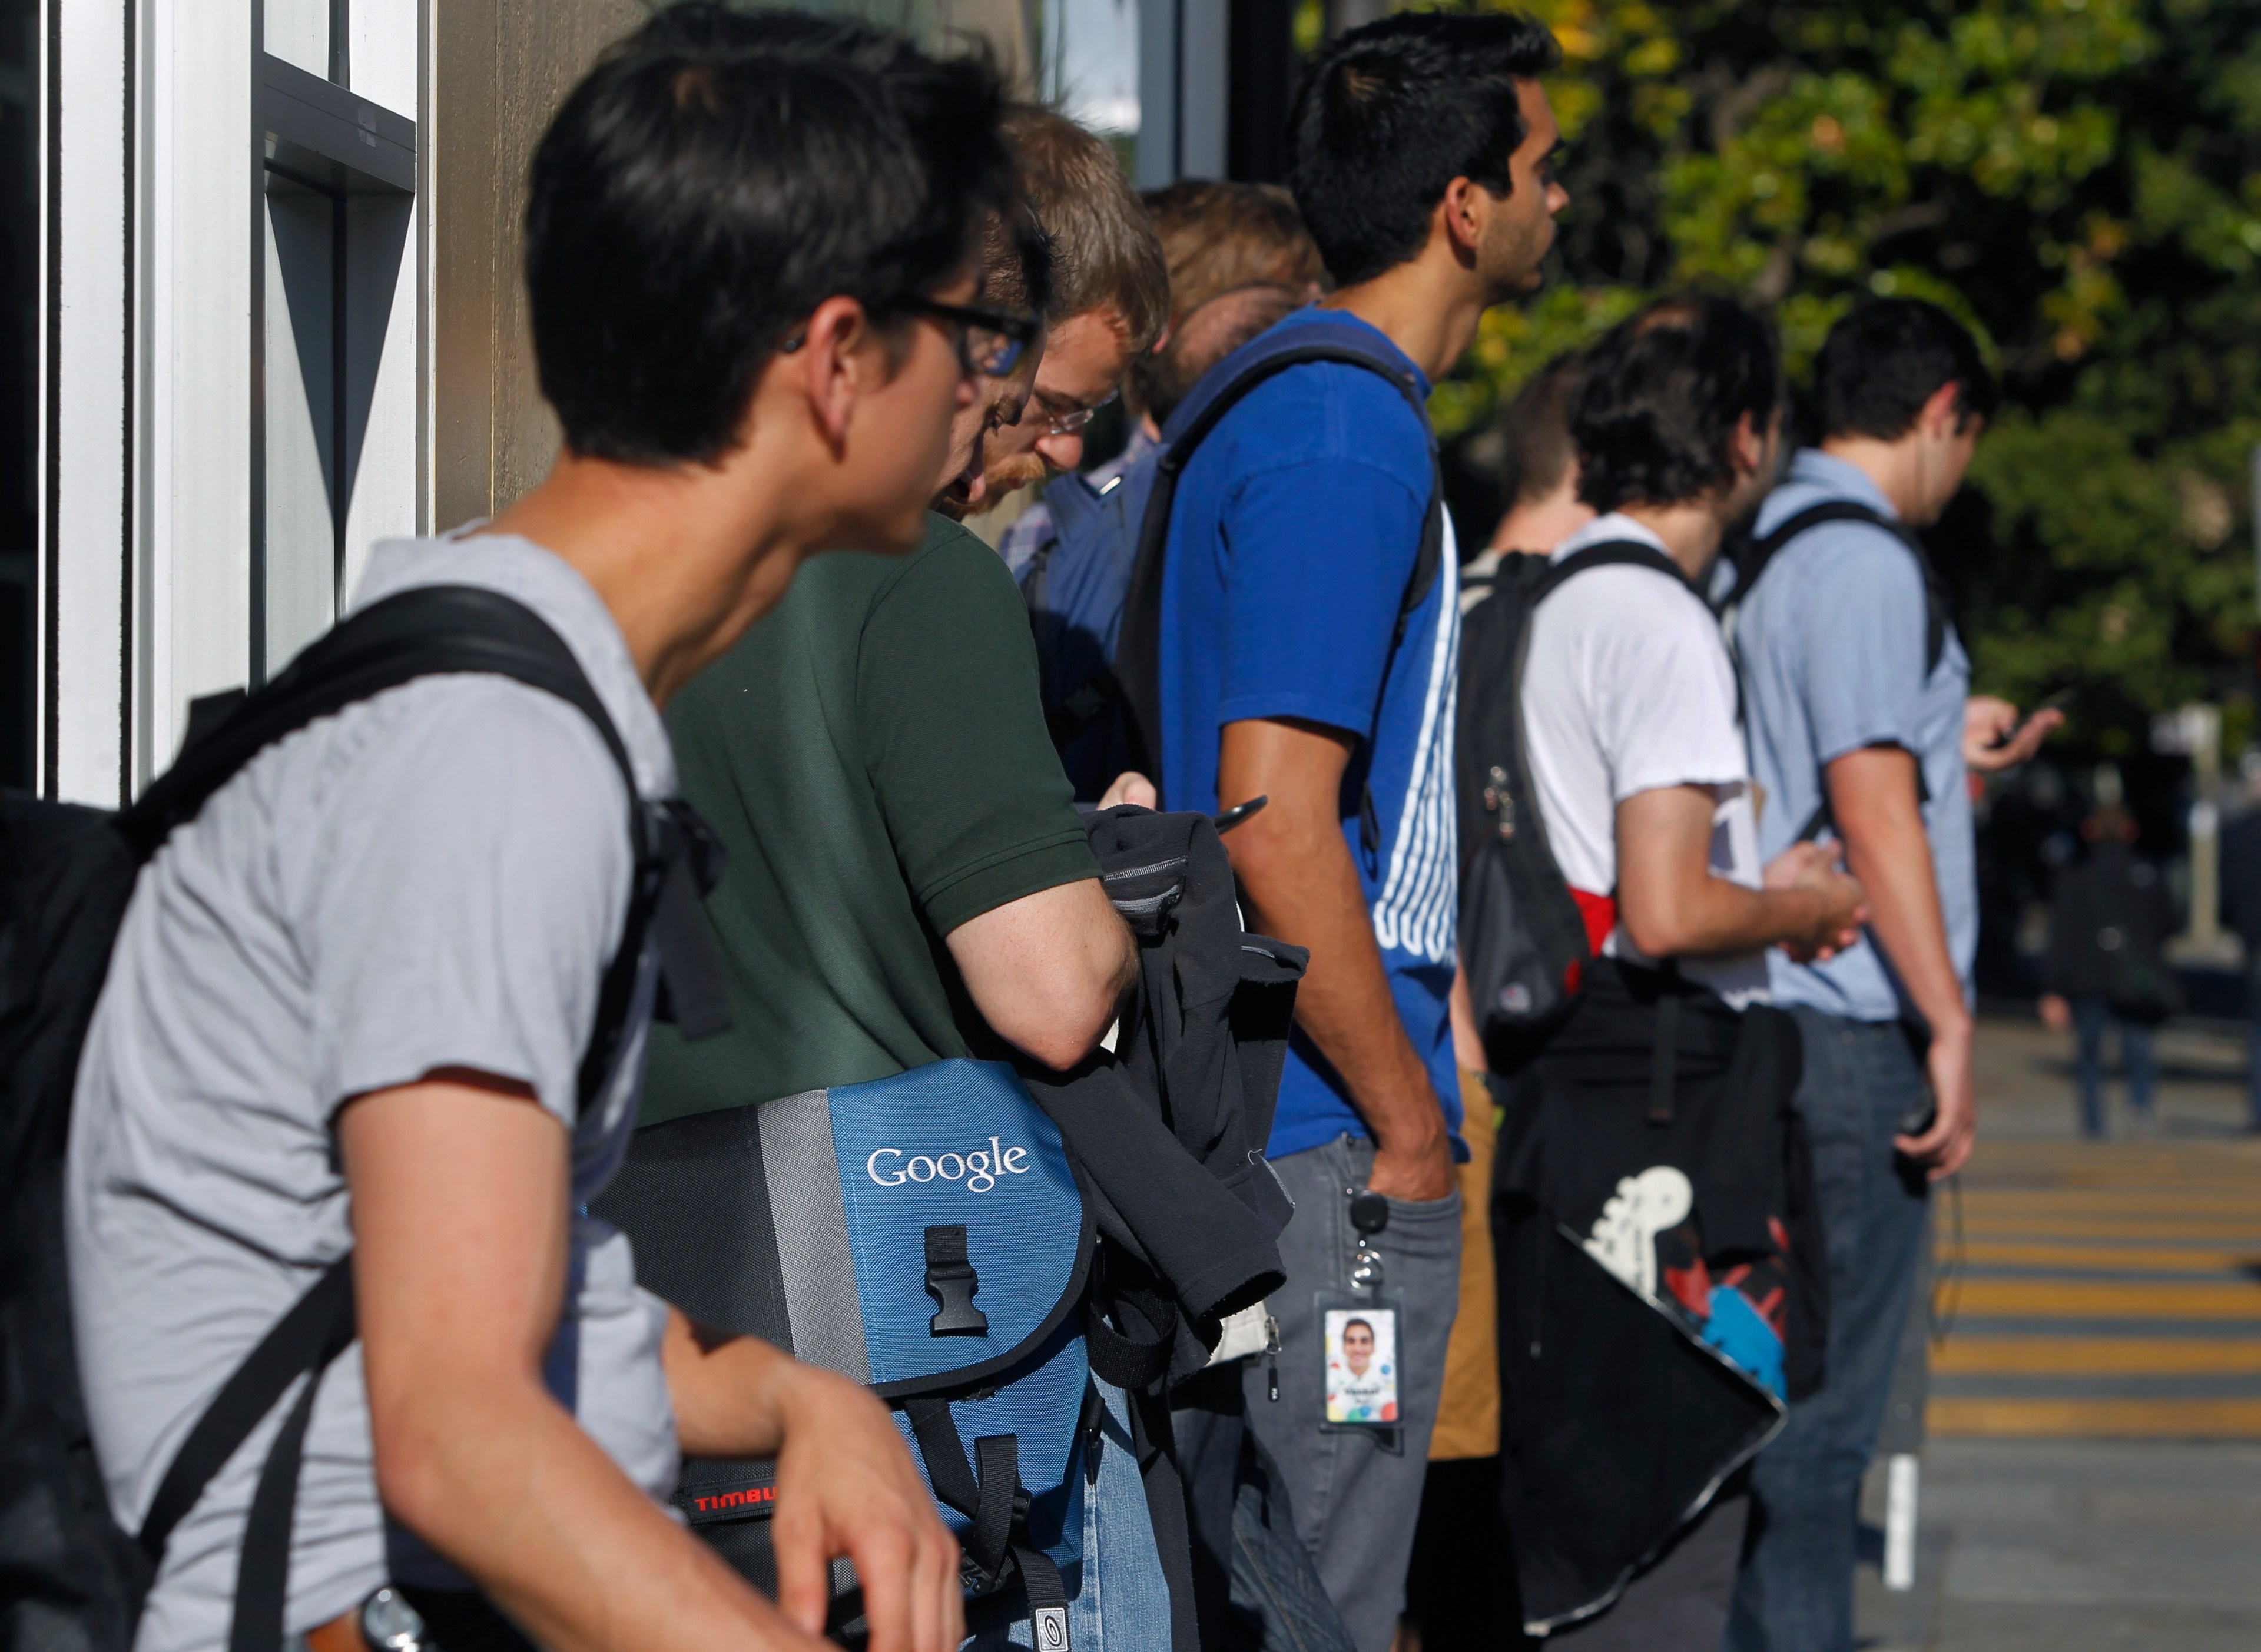 A group of people, mostly young men with backpacks and messenger bags, are standing in line outdoors. One visible bag reads &quot;Google.&quot;